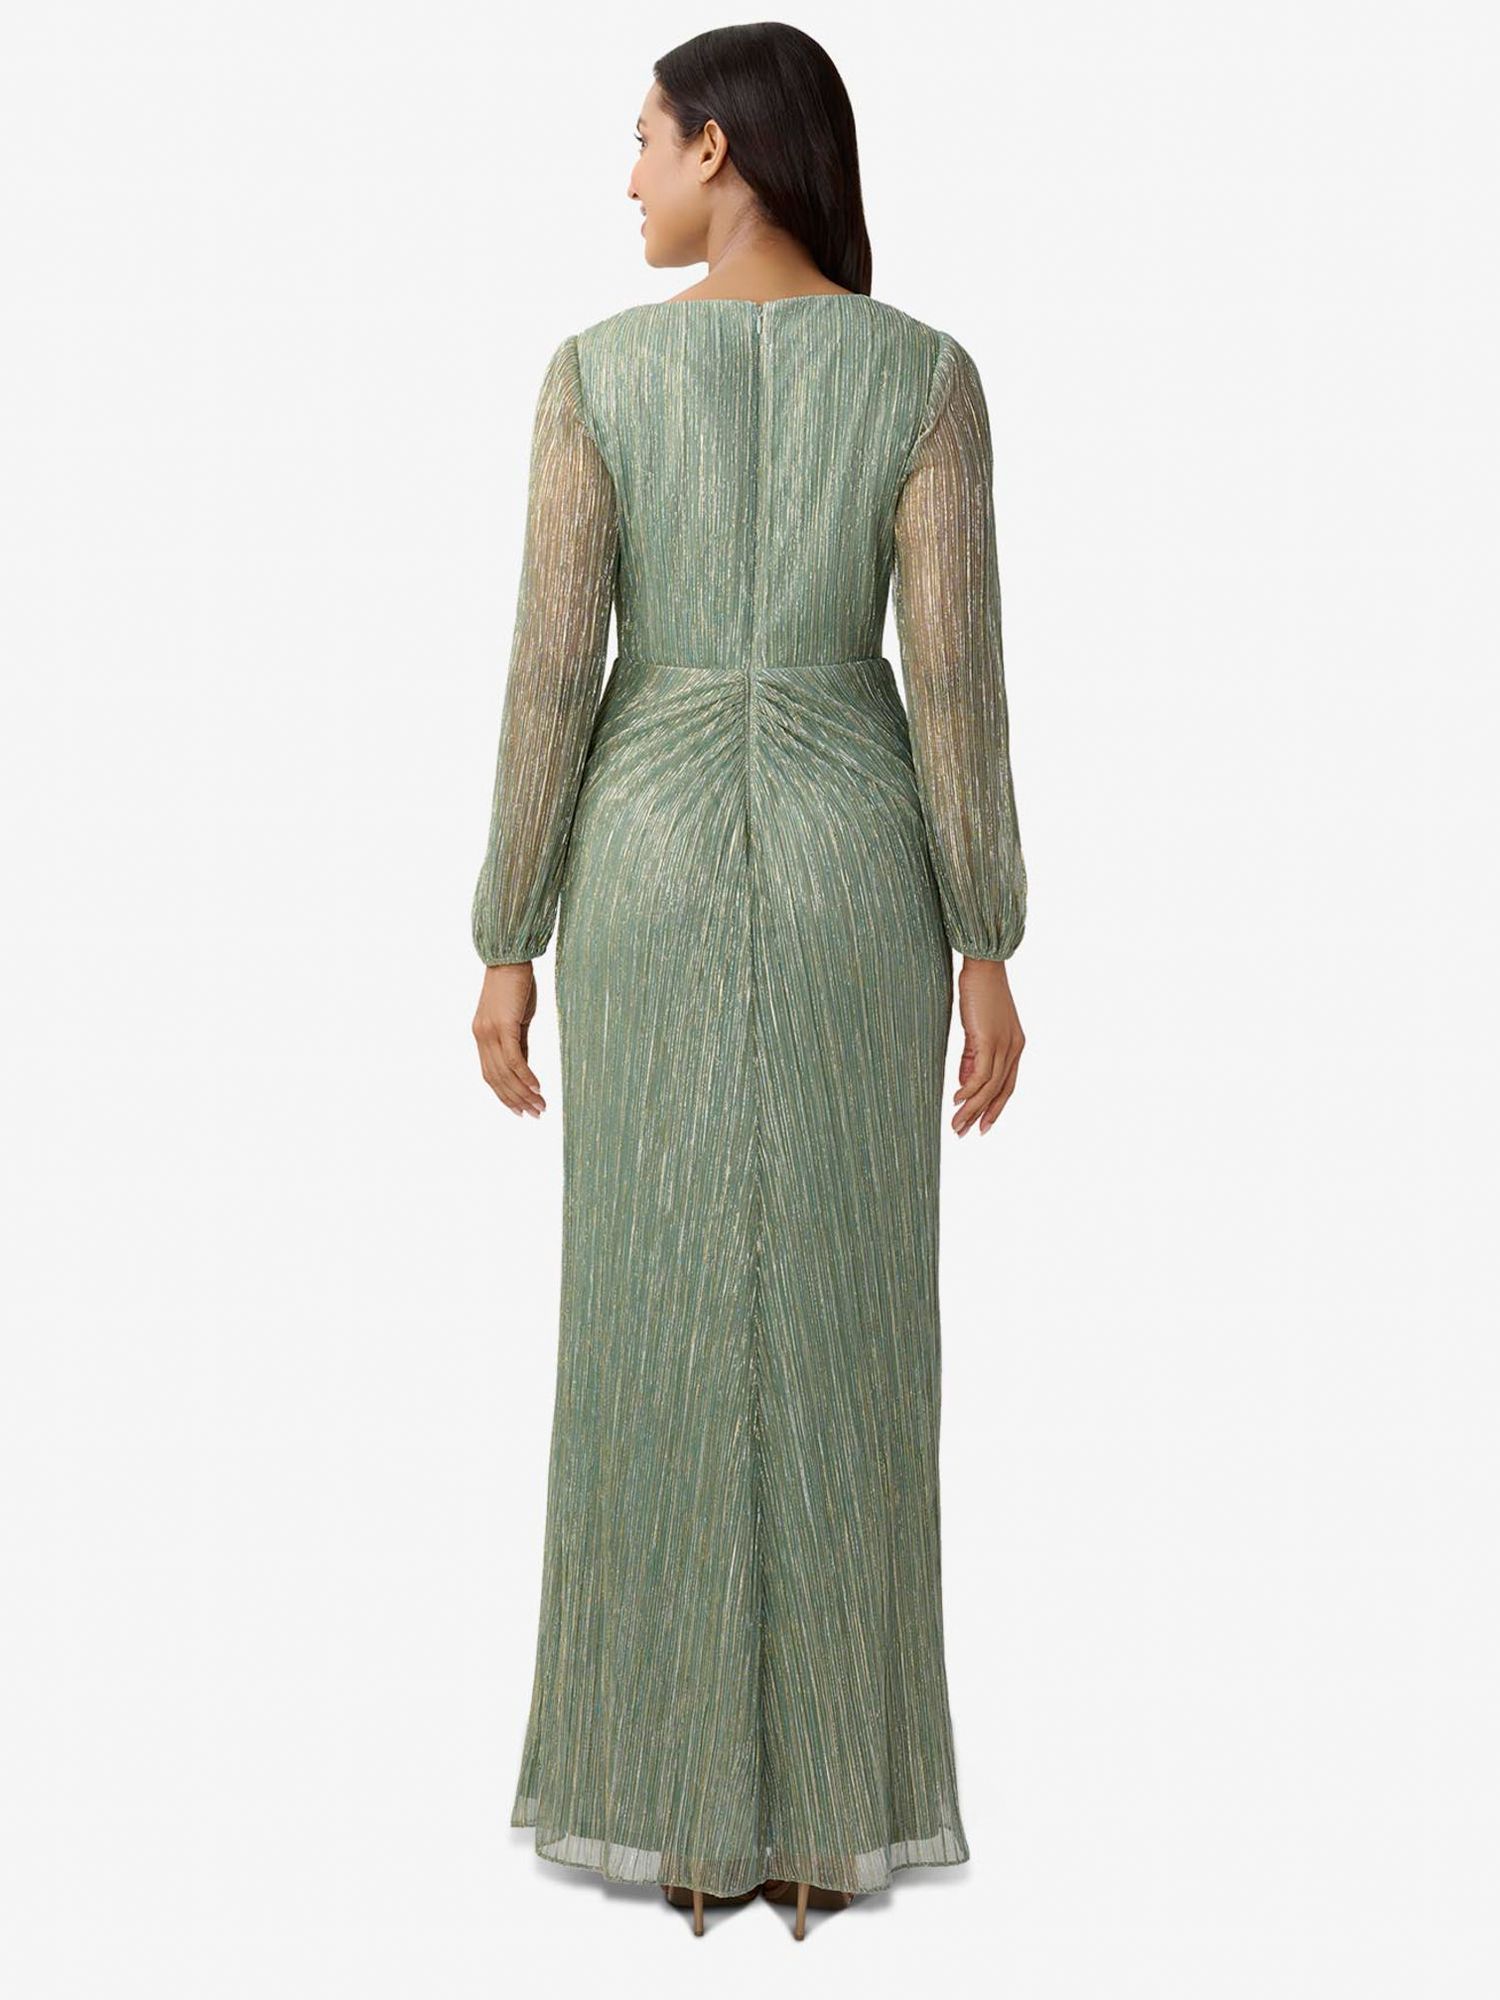 Buy Adrianna Papell Metallic Mesh Draped Gown, Green Slate Online at johnlewis.com